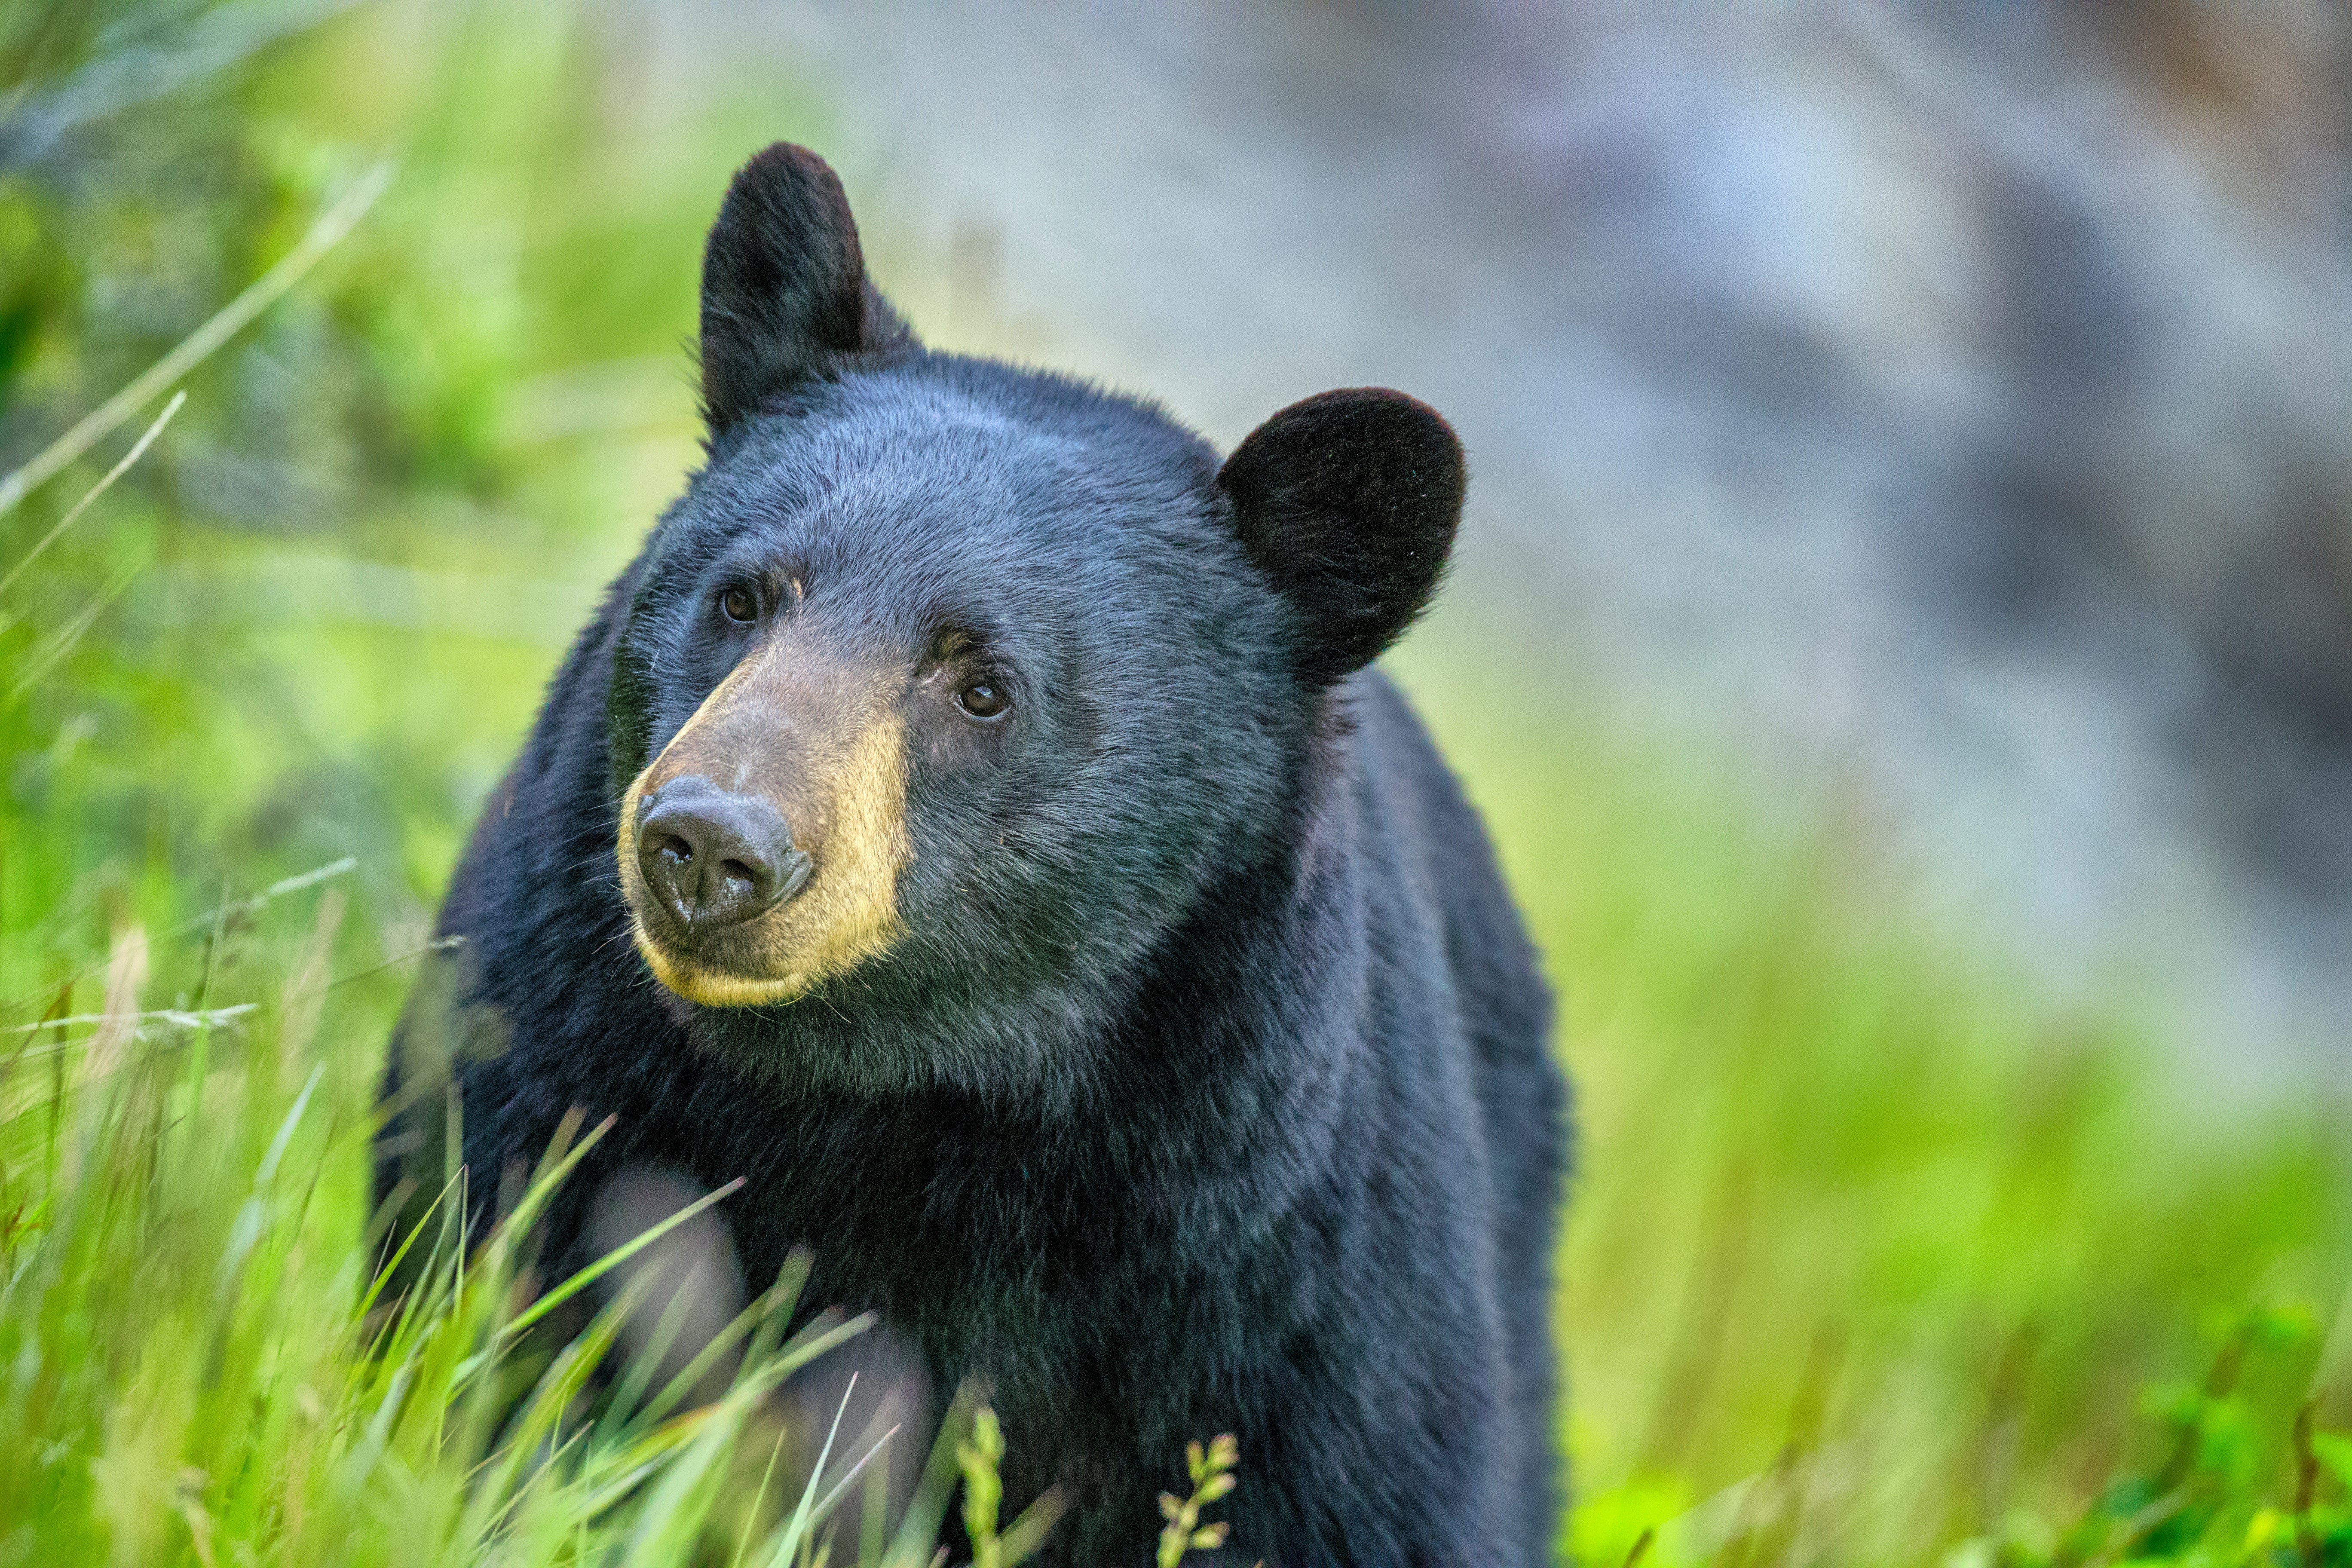 Bears and other animals have been seen coming into densely populated areas.